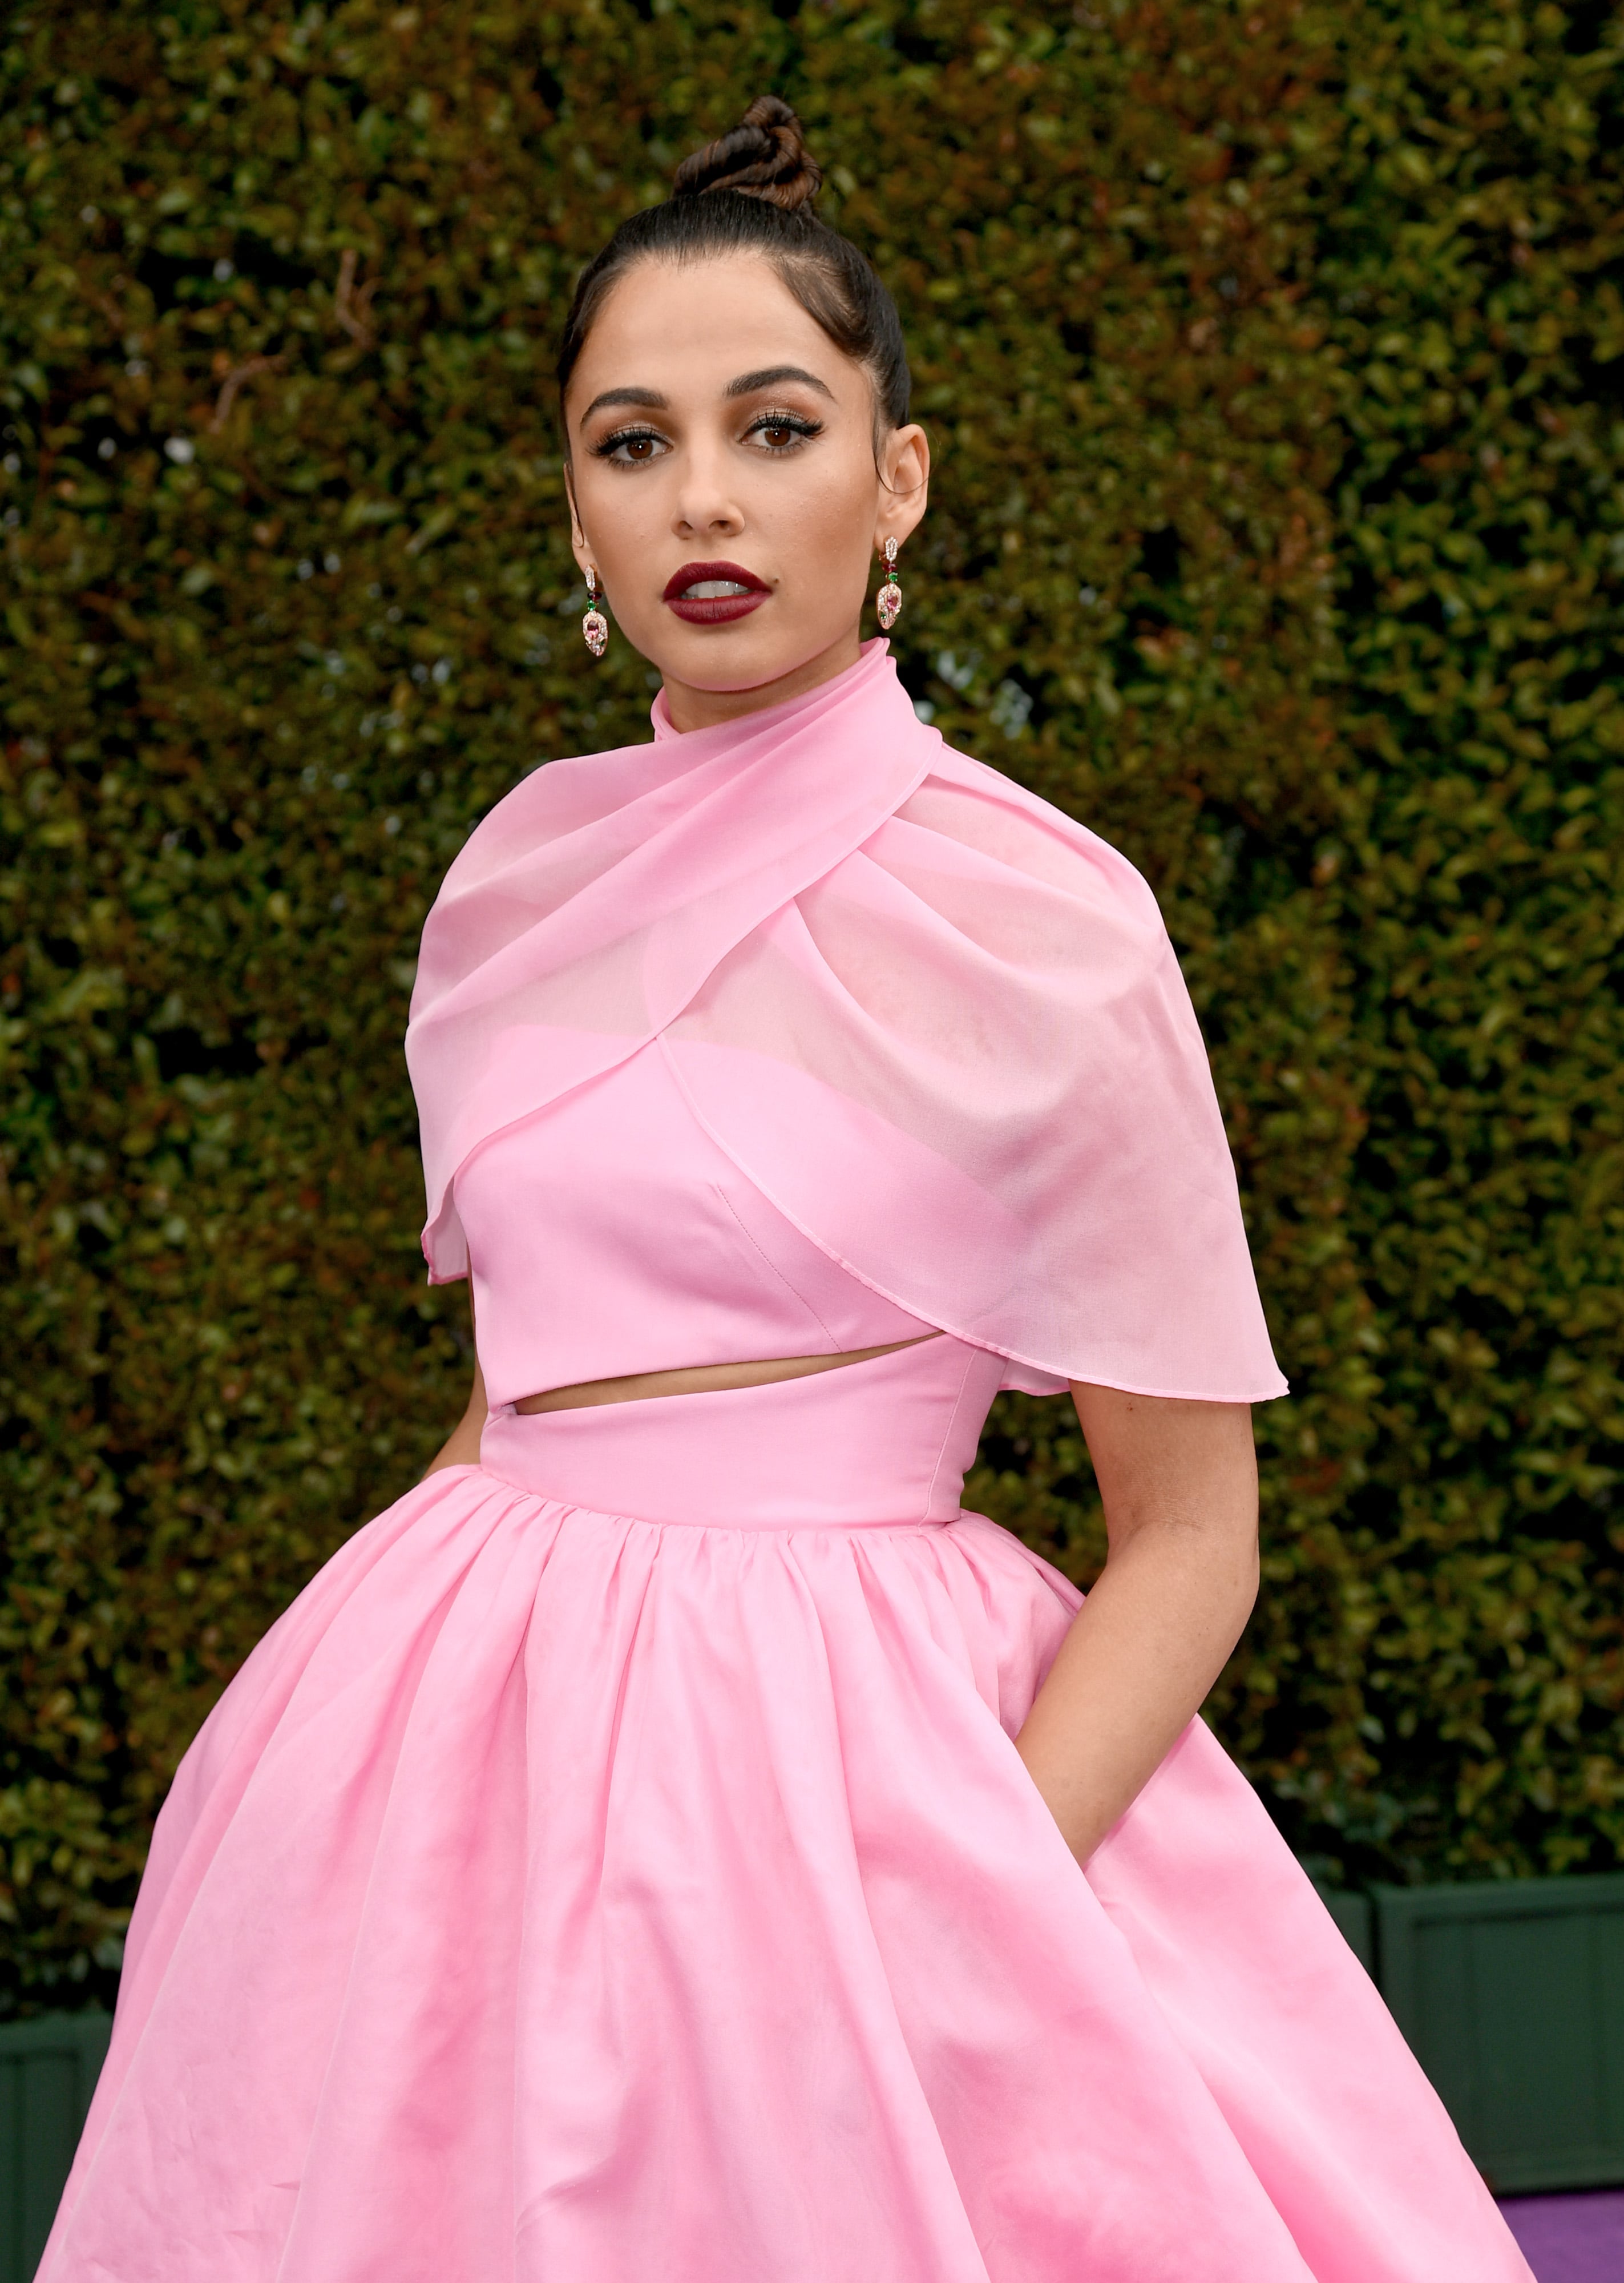 Great Outfits in Fashion History: Naomi Scott in a Brandon Maxwell Gown Fit  for a Disney Princess - Fashionista